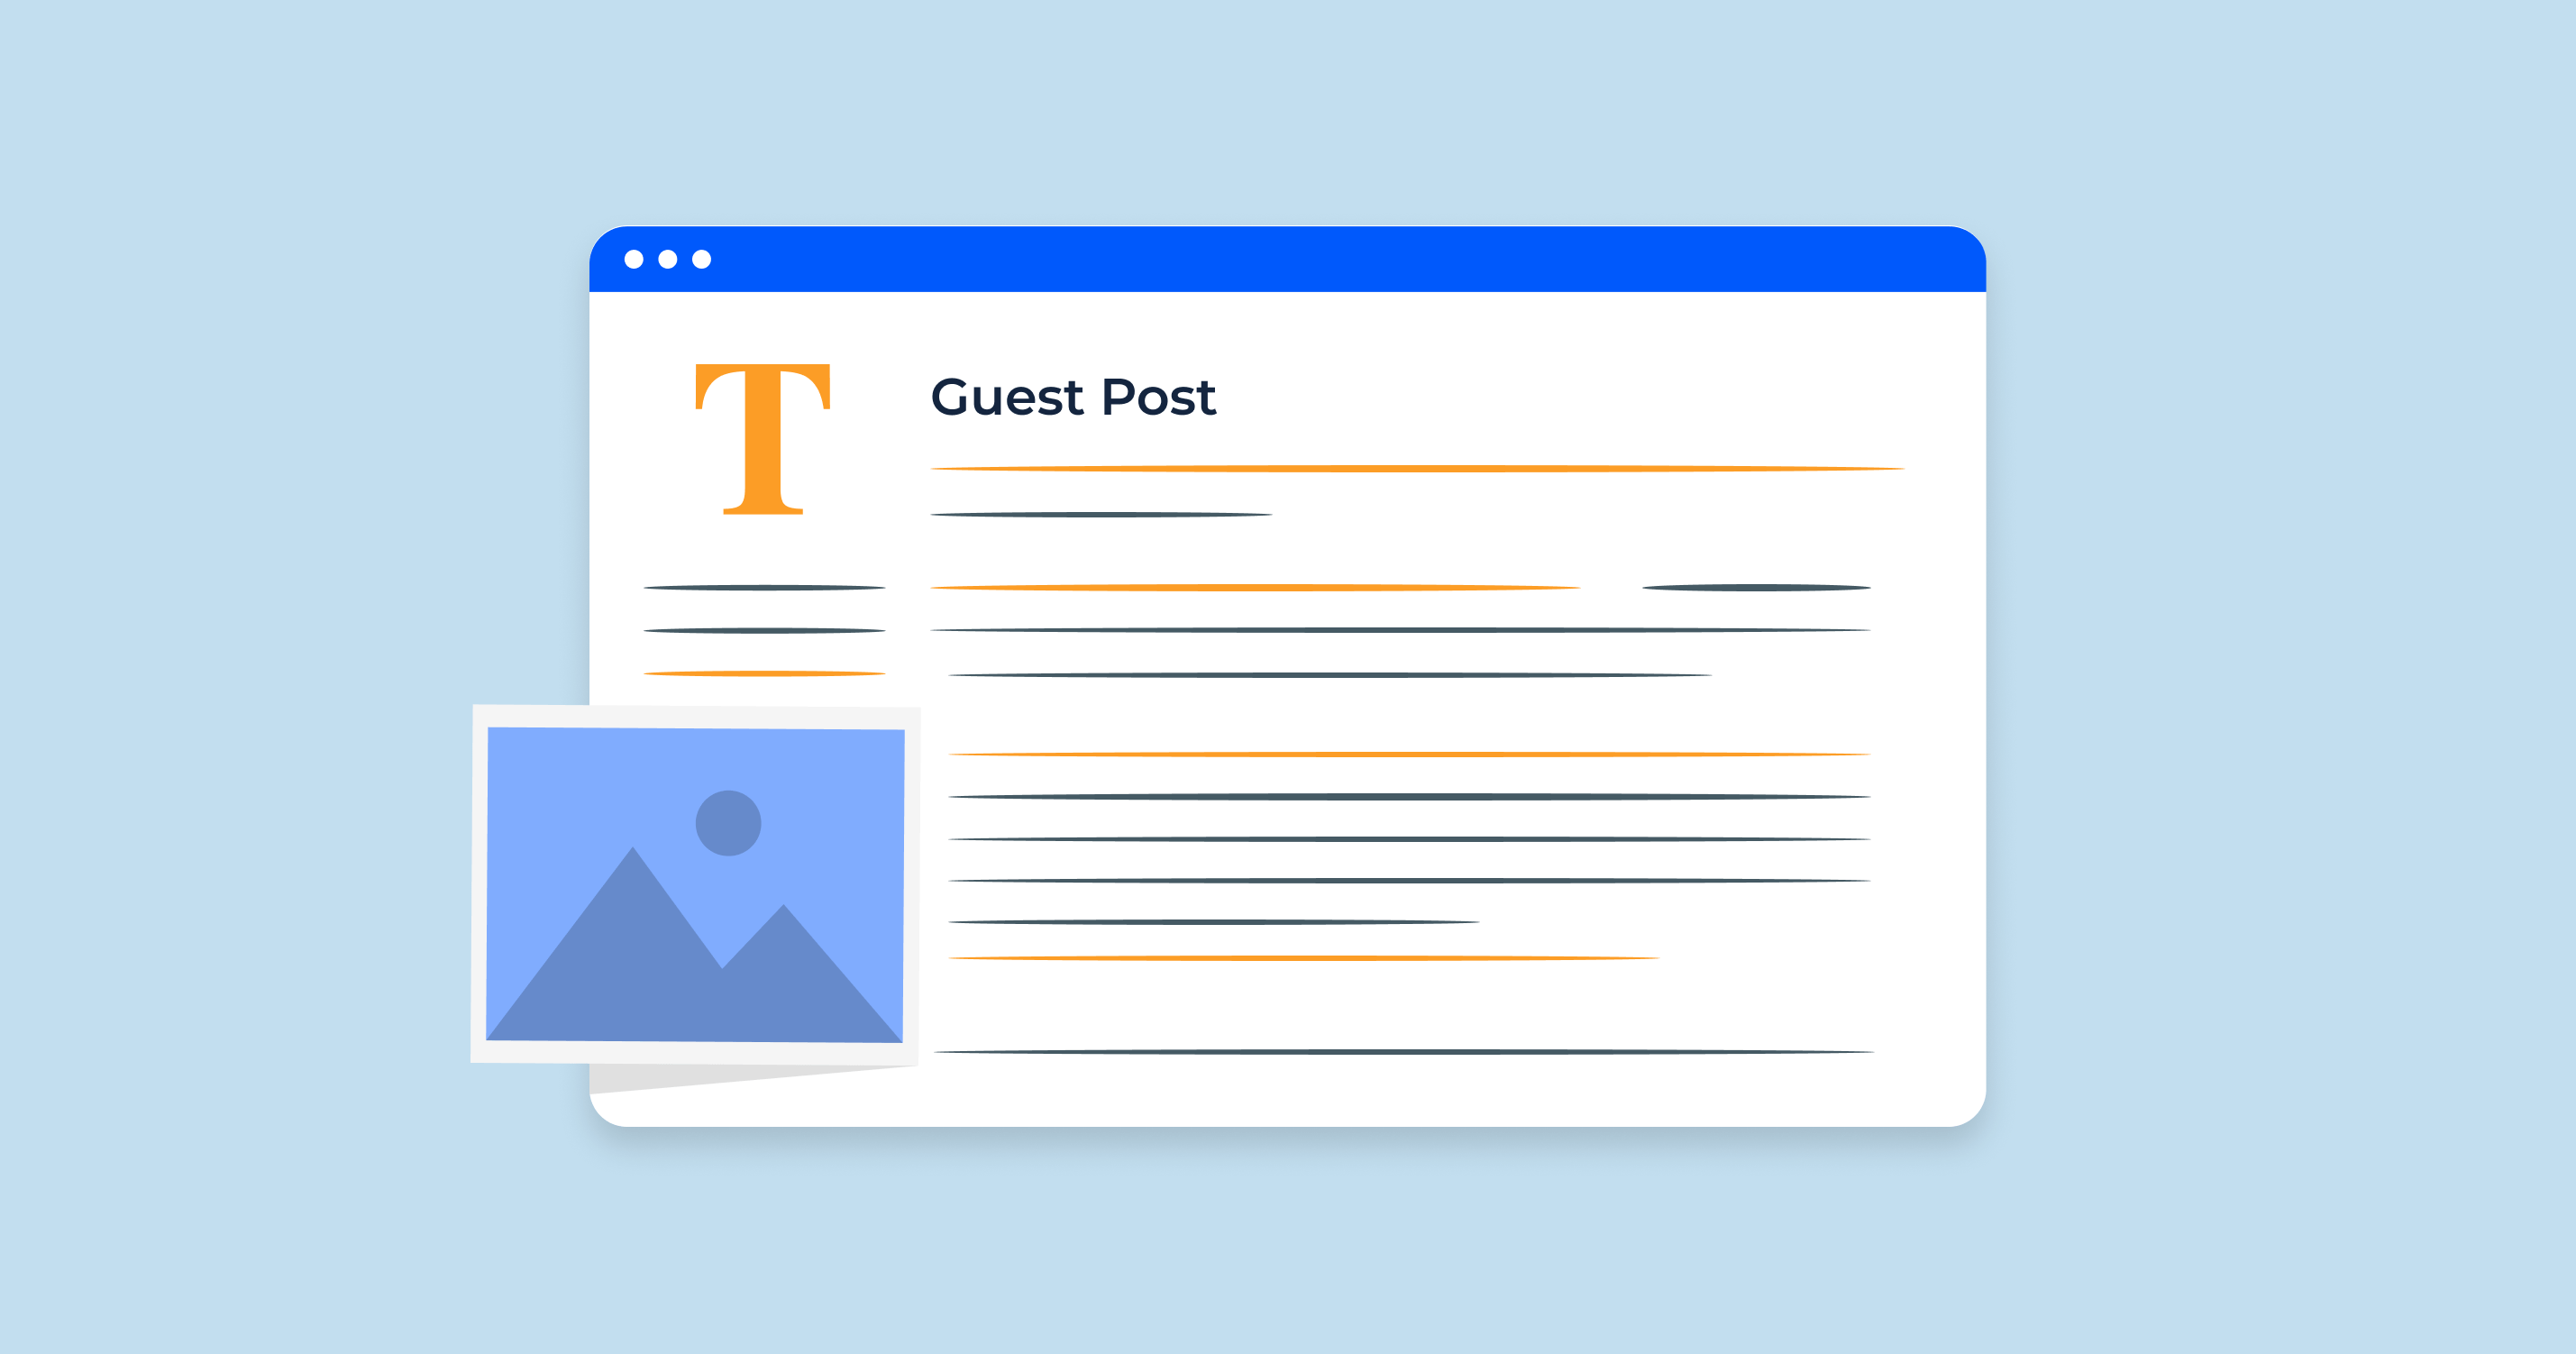 What is Guest Posting?